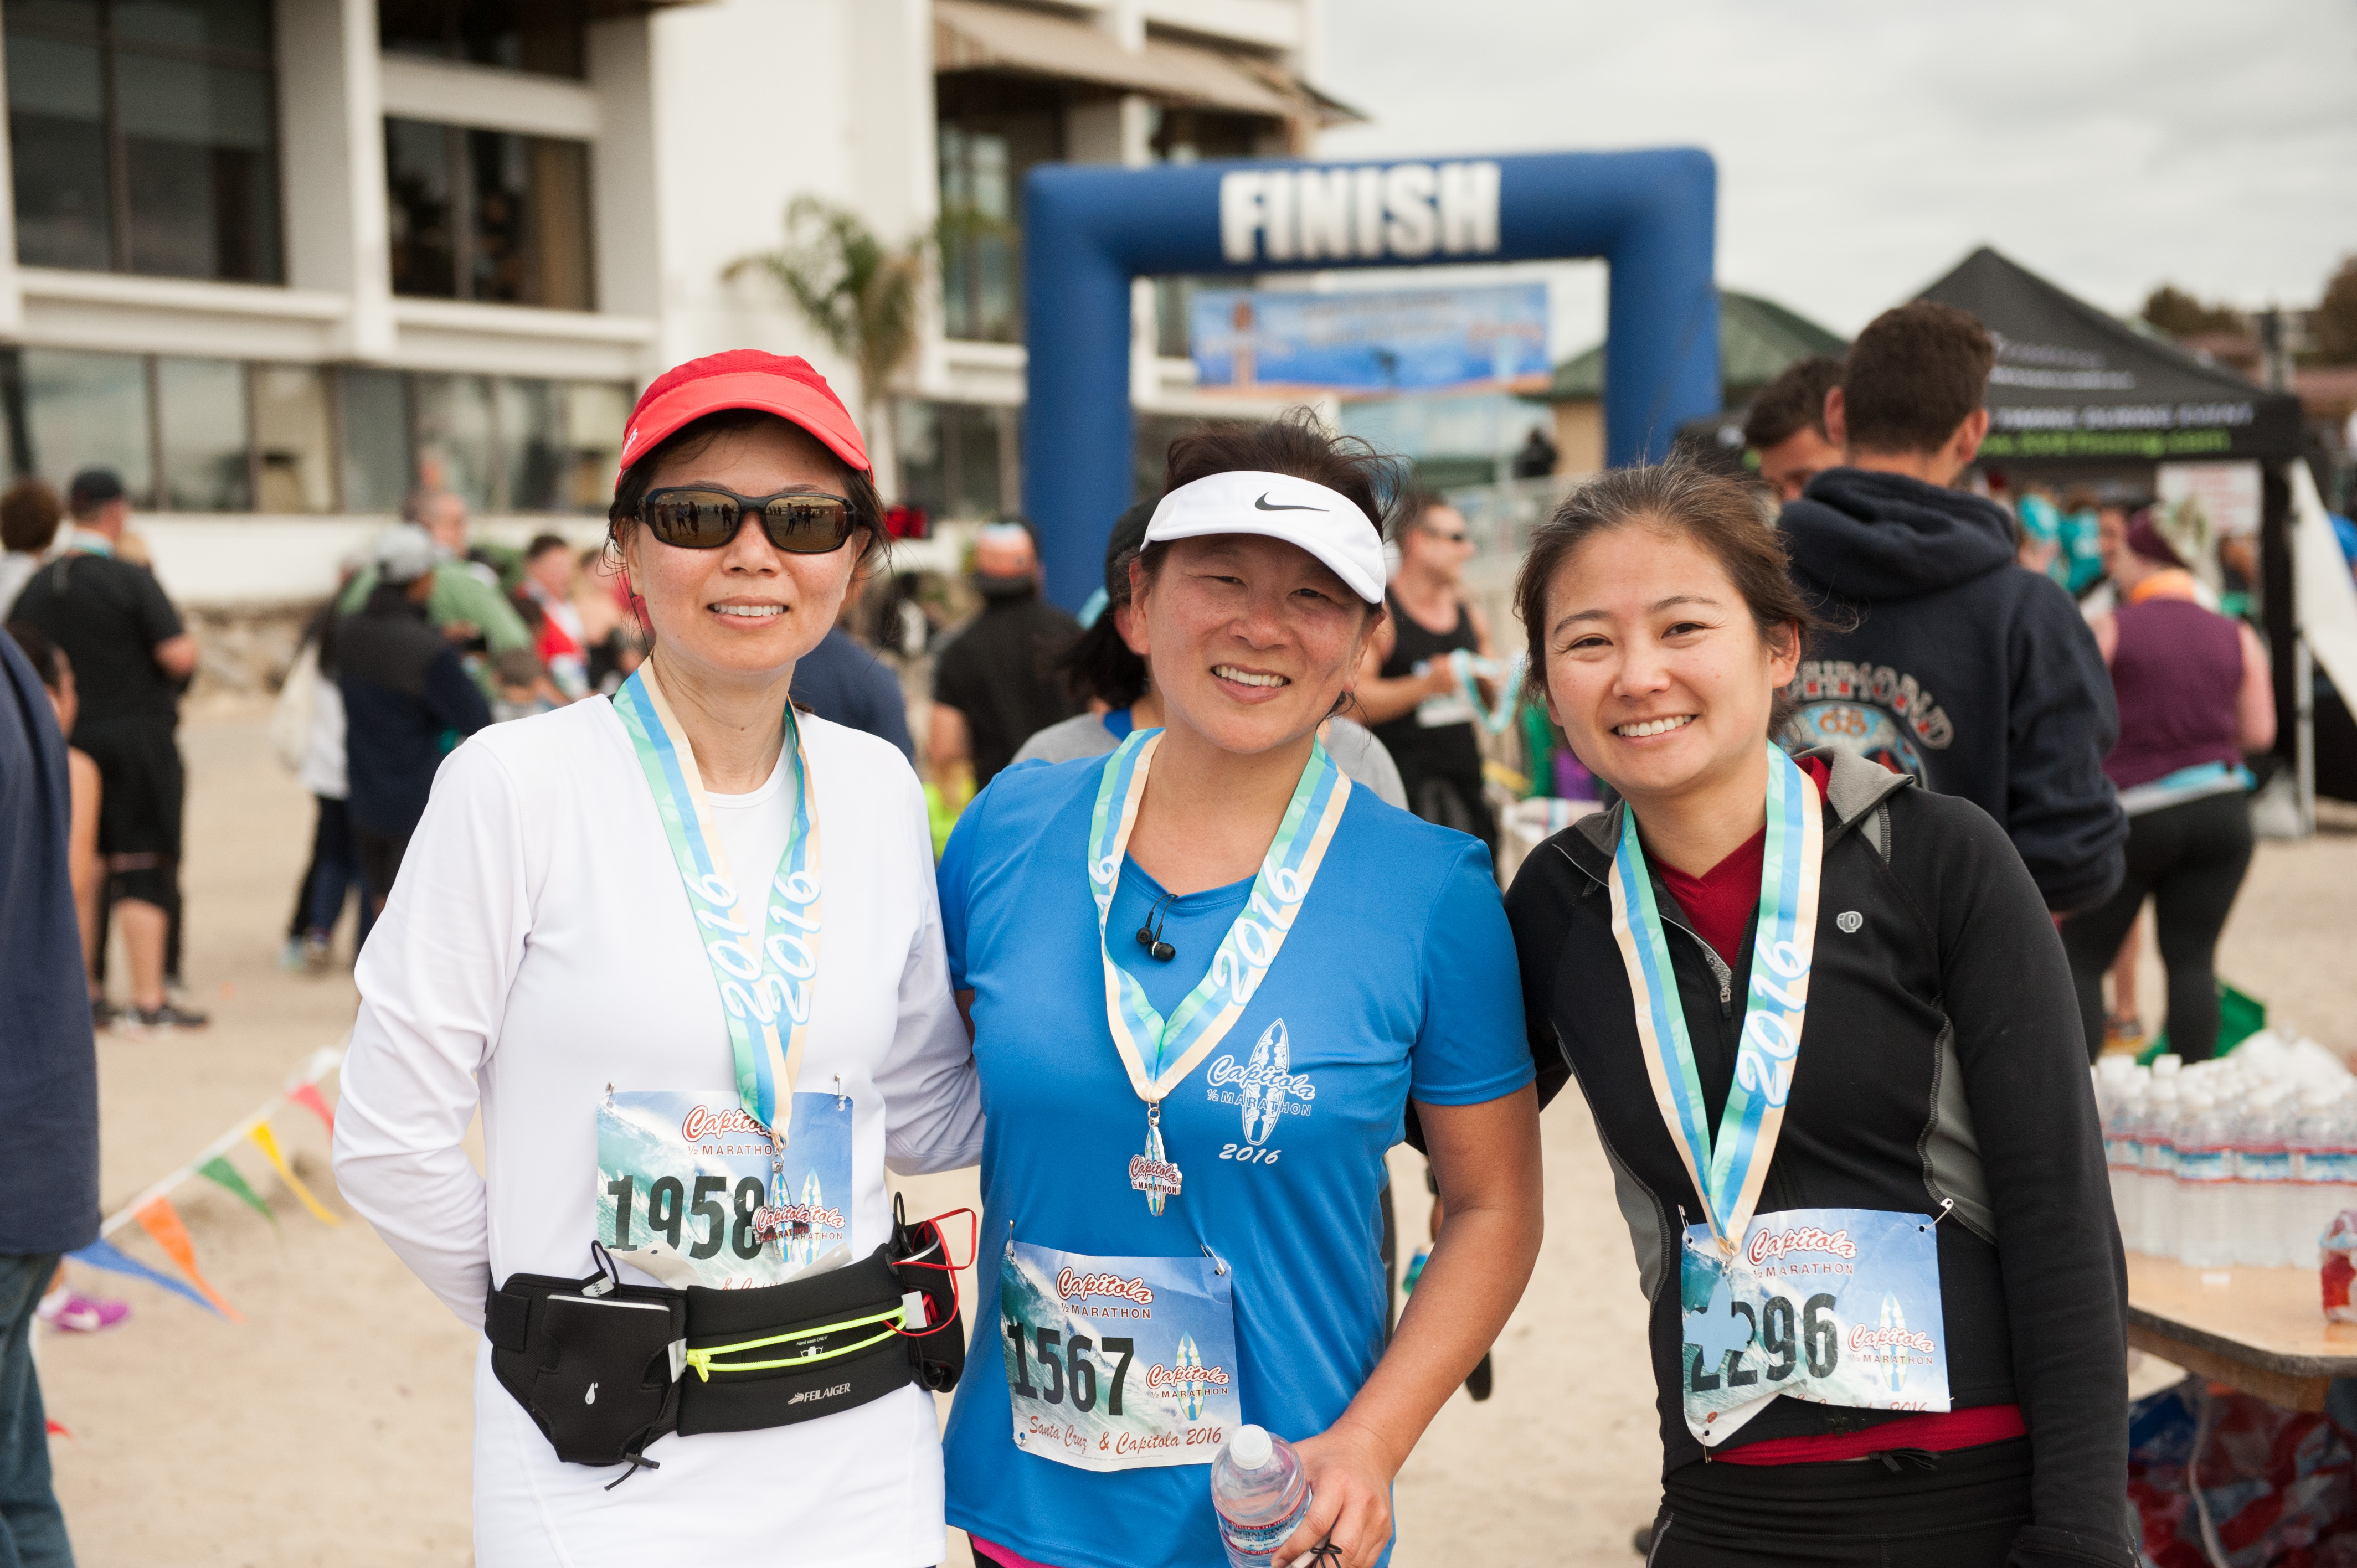 Emilie Ly, Amee Cooper, and Prof. Takamura after completing the Capitola Half Marathon